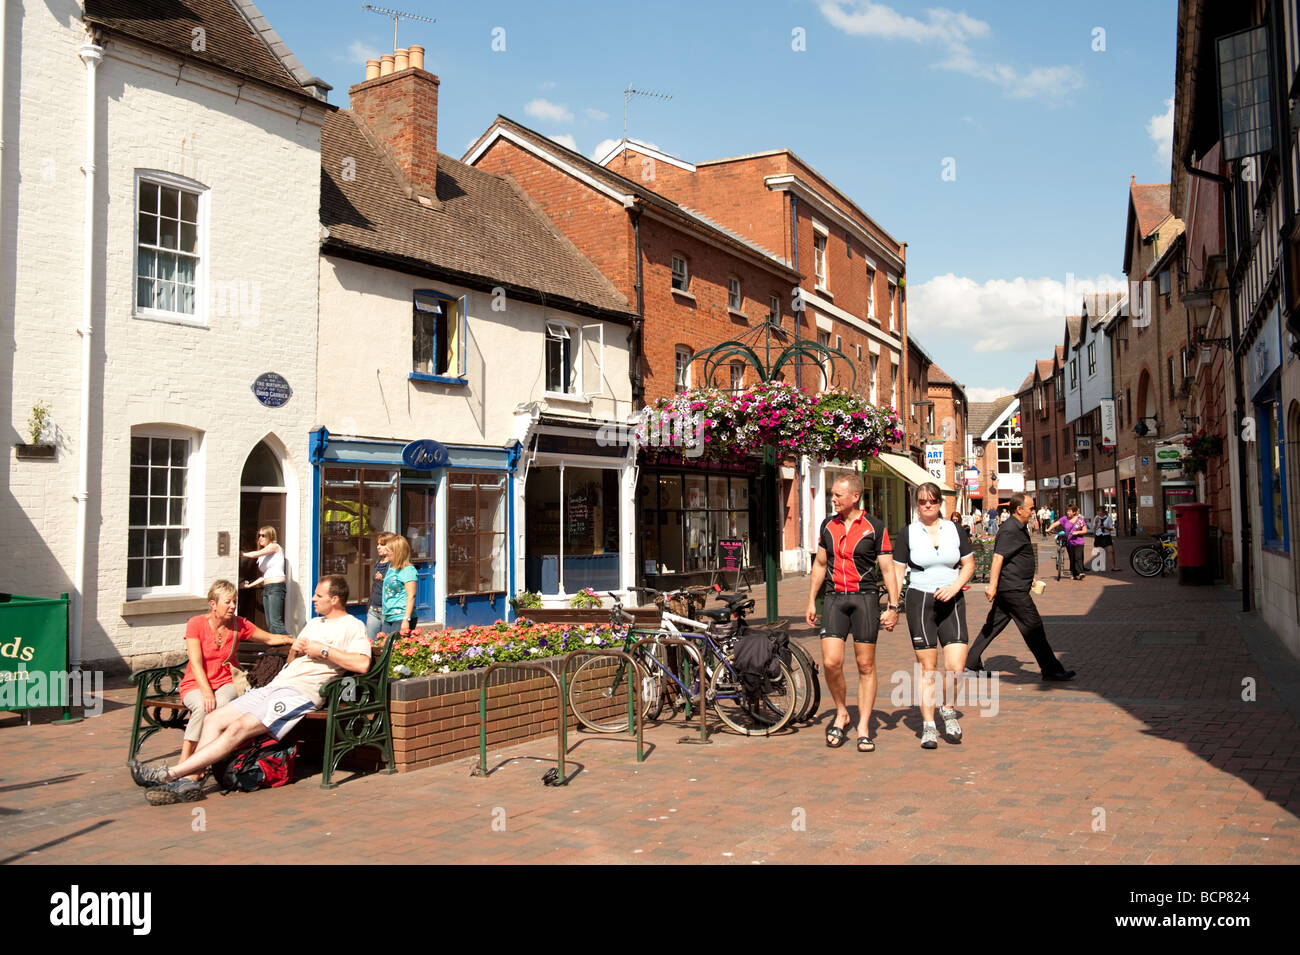 Maylord Street, Hereford city Herefordshire Inglaterra Foto de stock